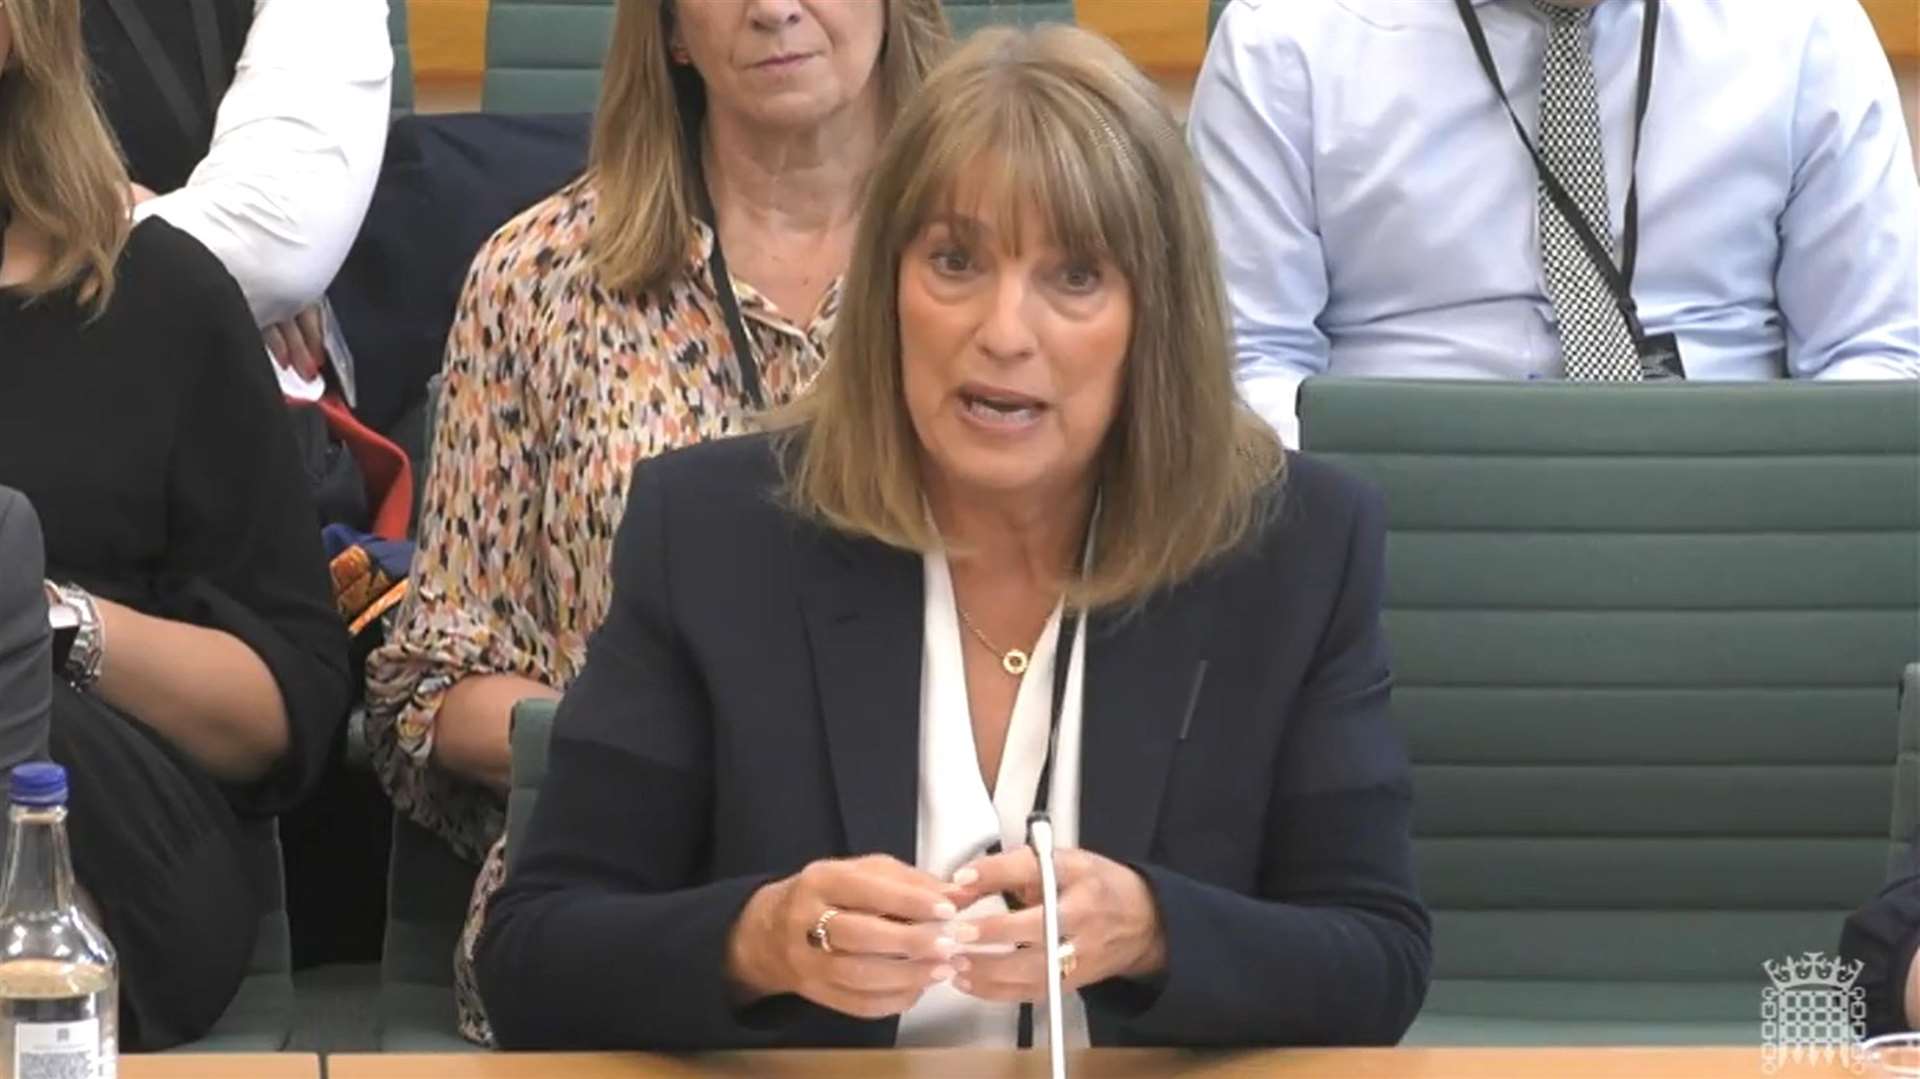 ITV chief executive Dame Carolyn McCall gives evidence to the Digital, Culture, Media and Sport Committee (House of Commons/PA)